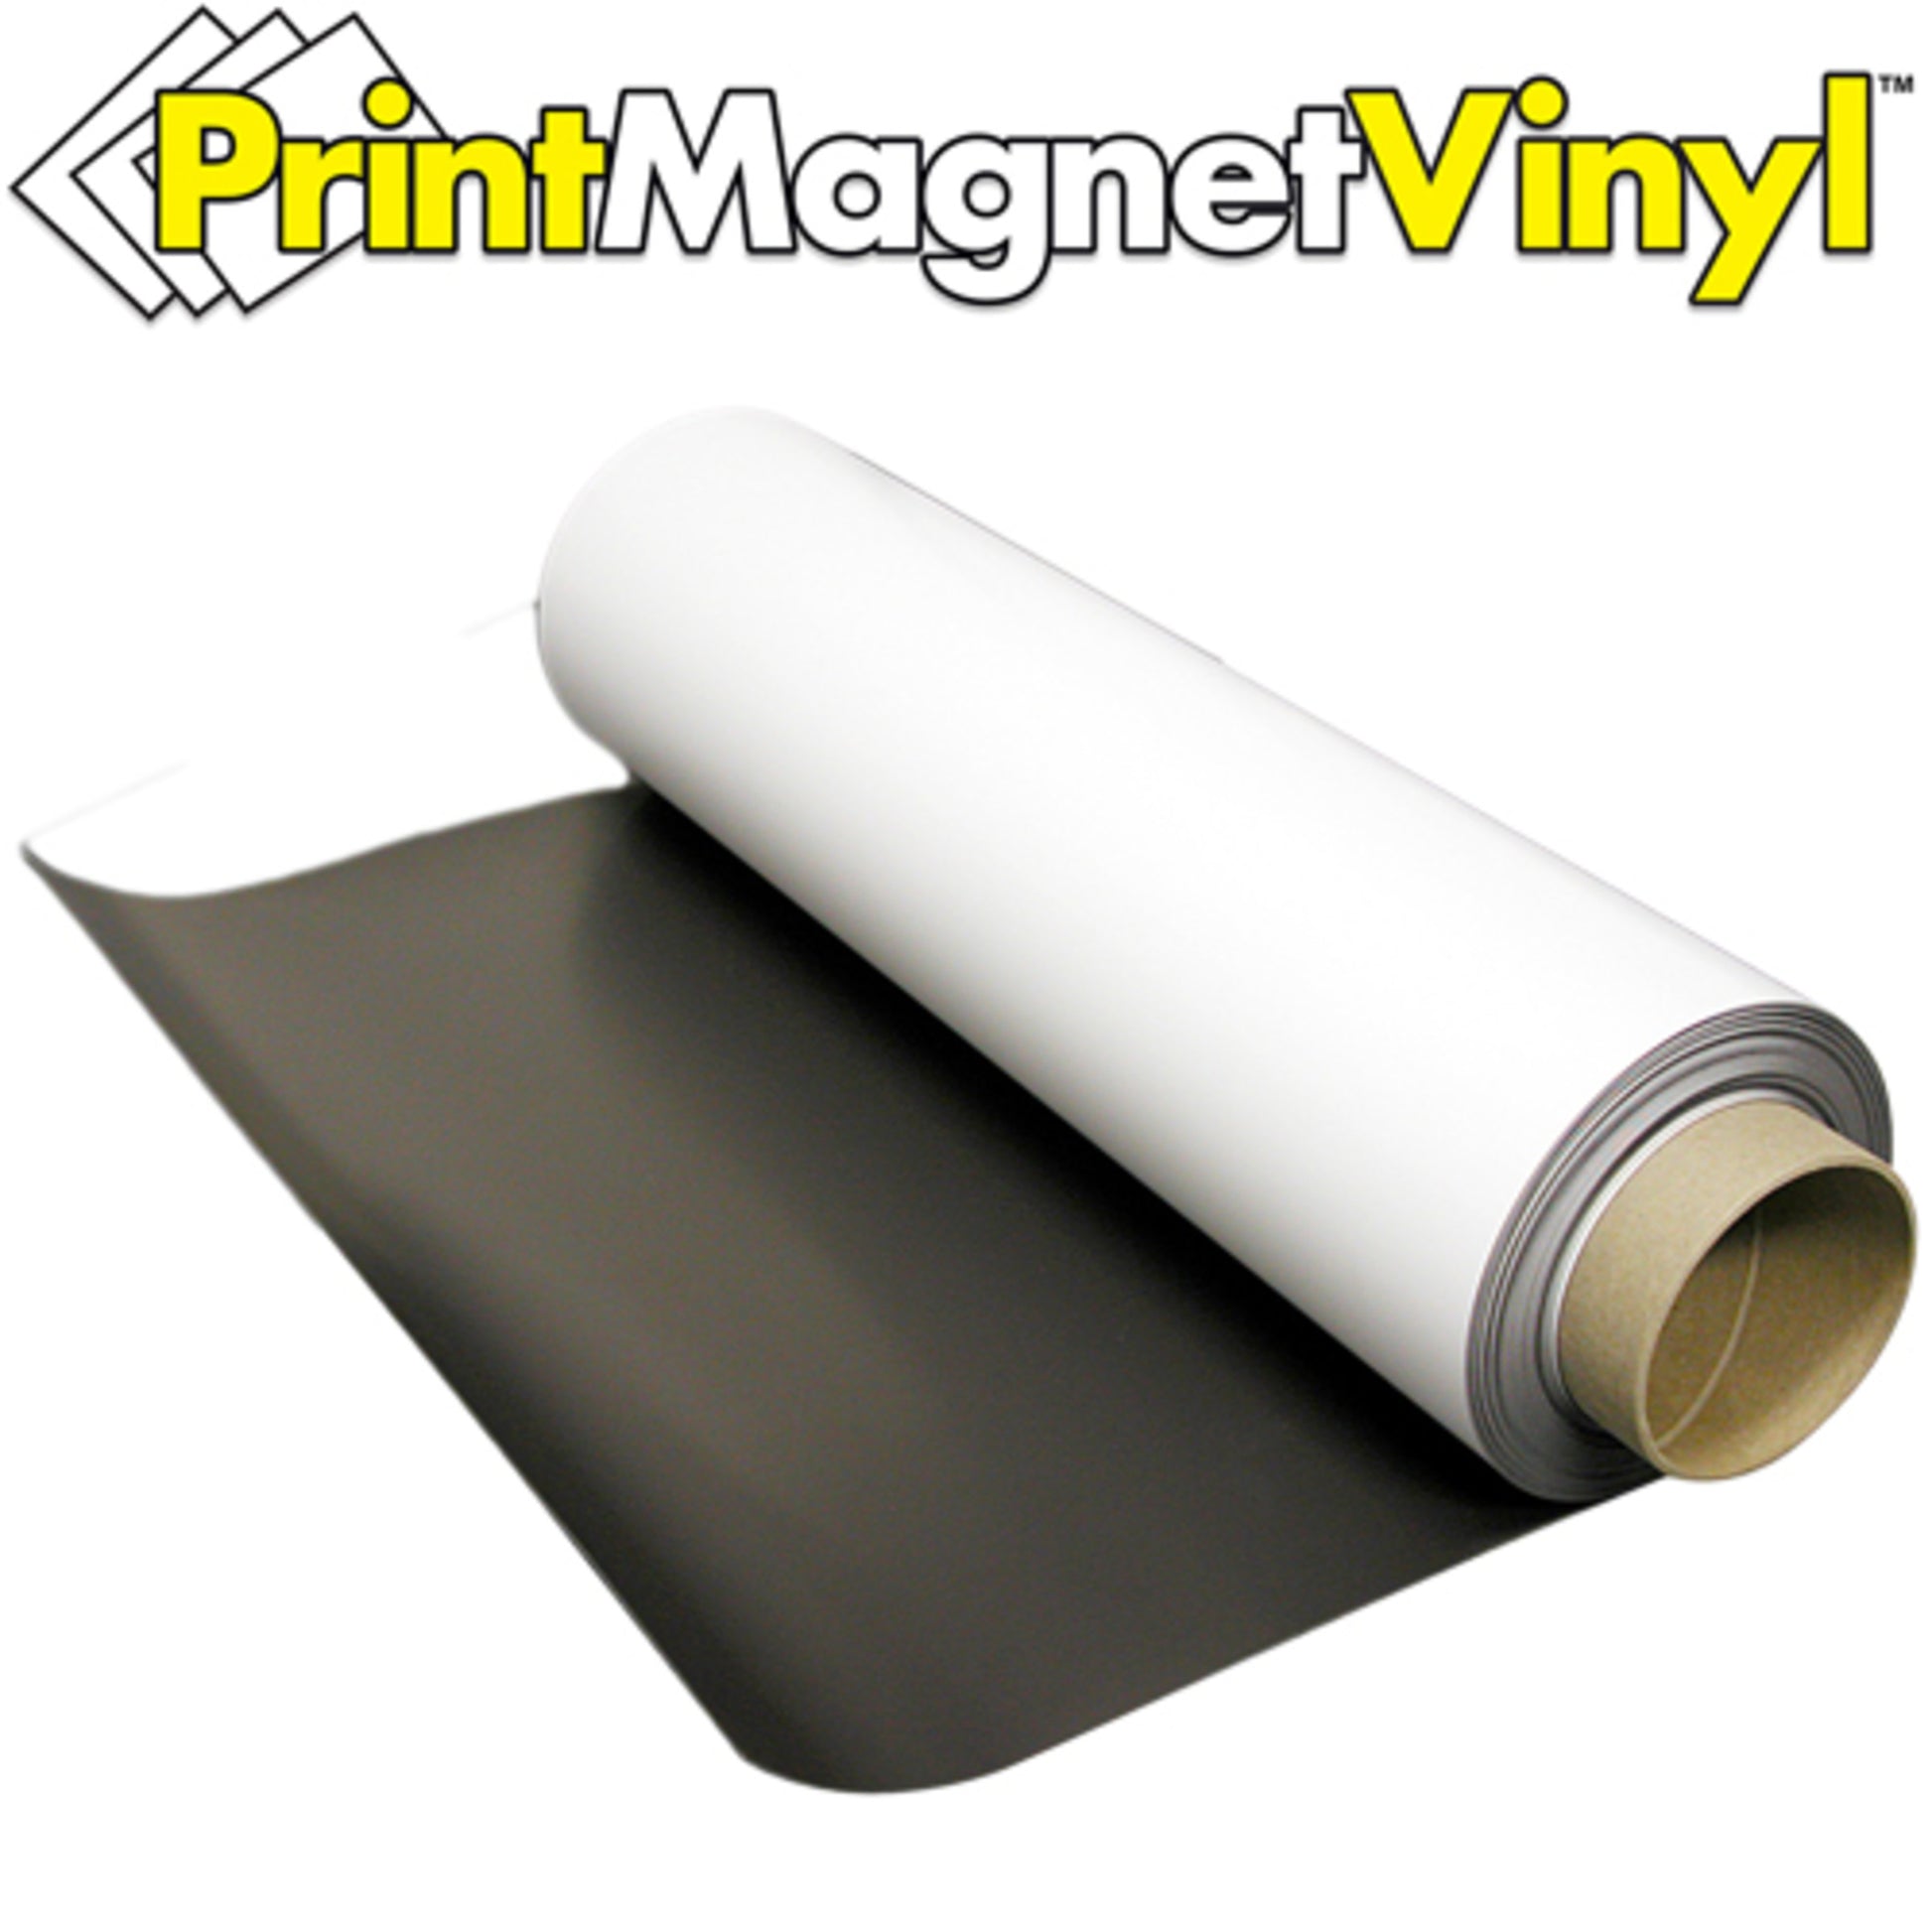 Load image into Gallery viewer, ZGN3030GW50 PrintMagnetVinyl™ Flexible Magnetic Sheet - In Use